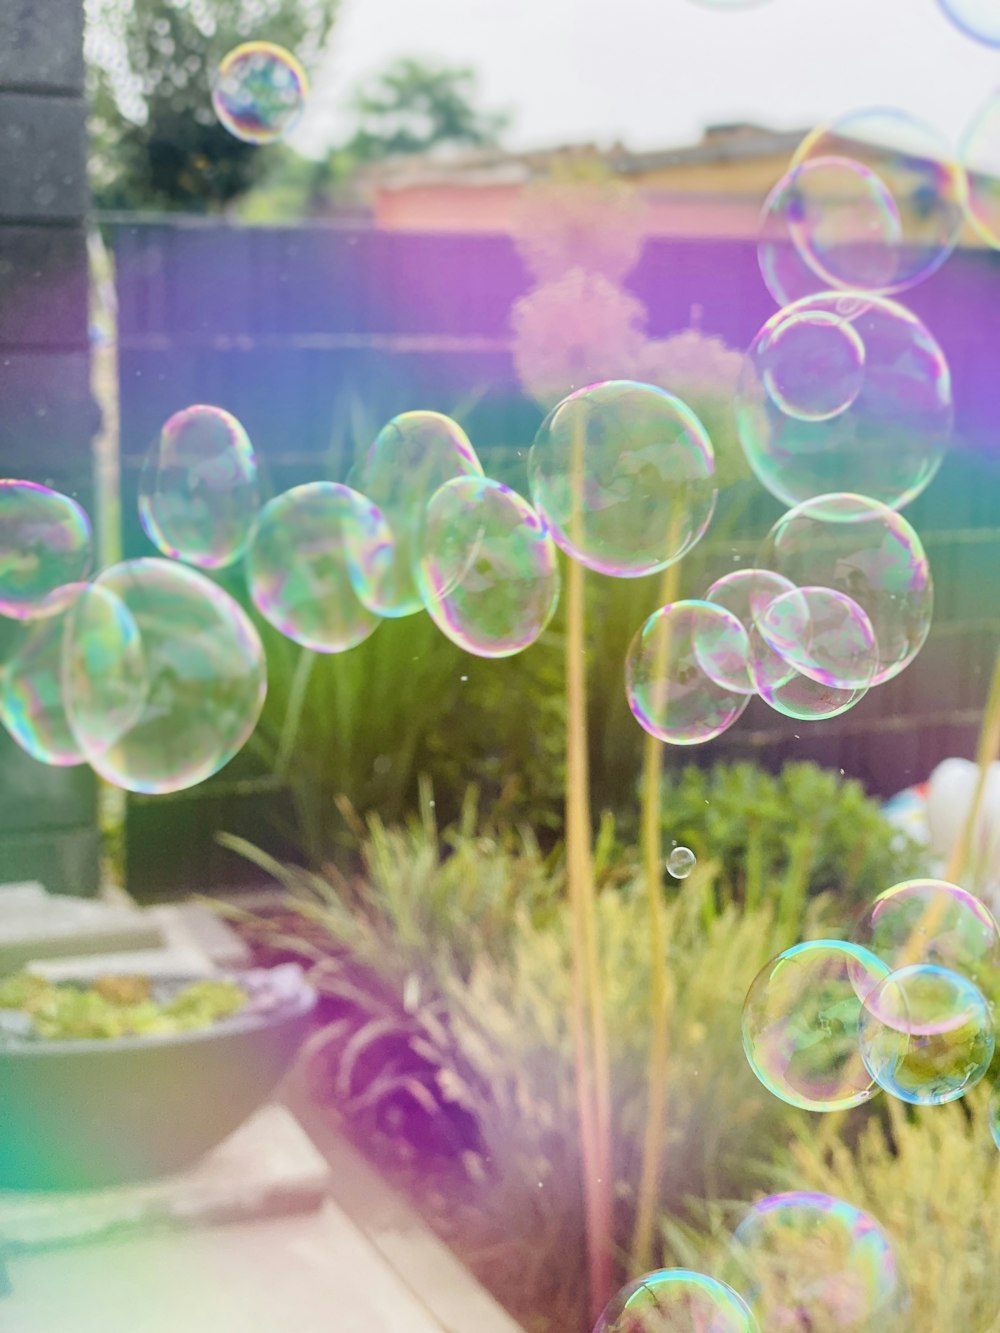 bubbles in mid air during daytime